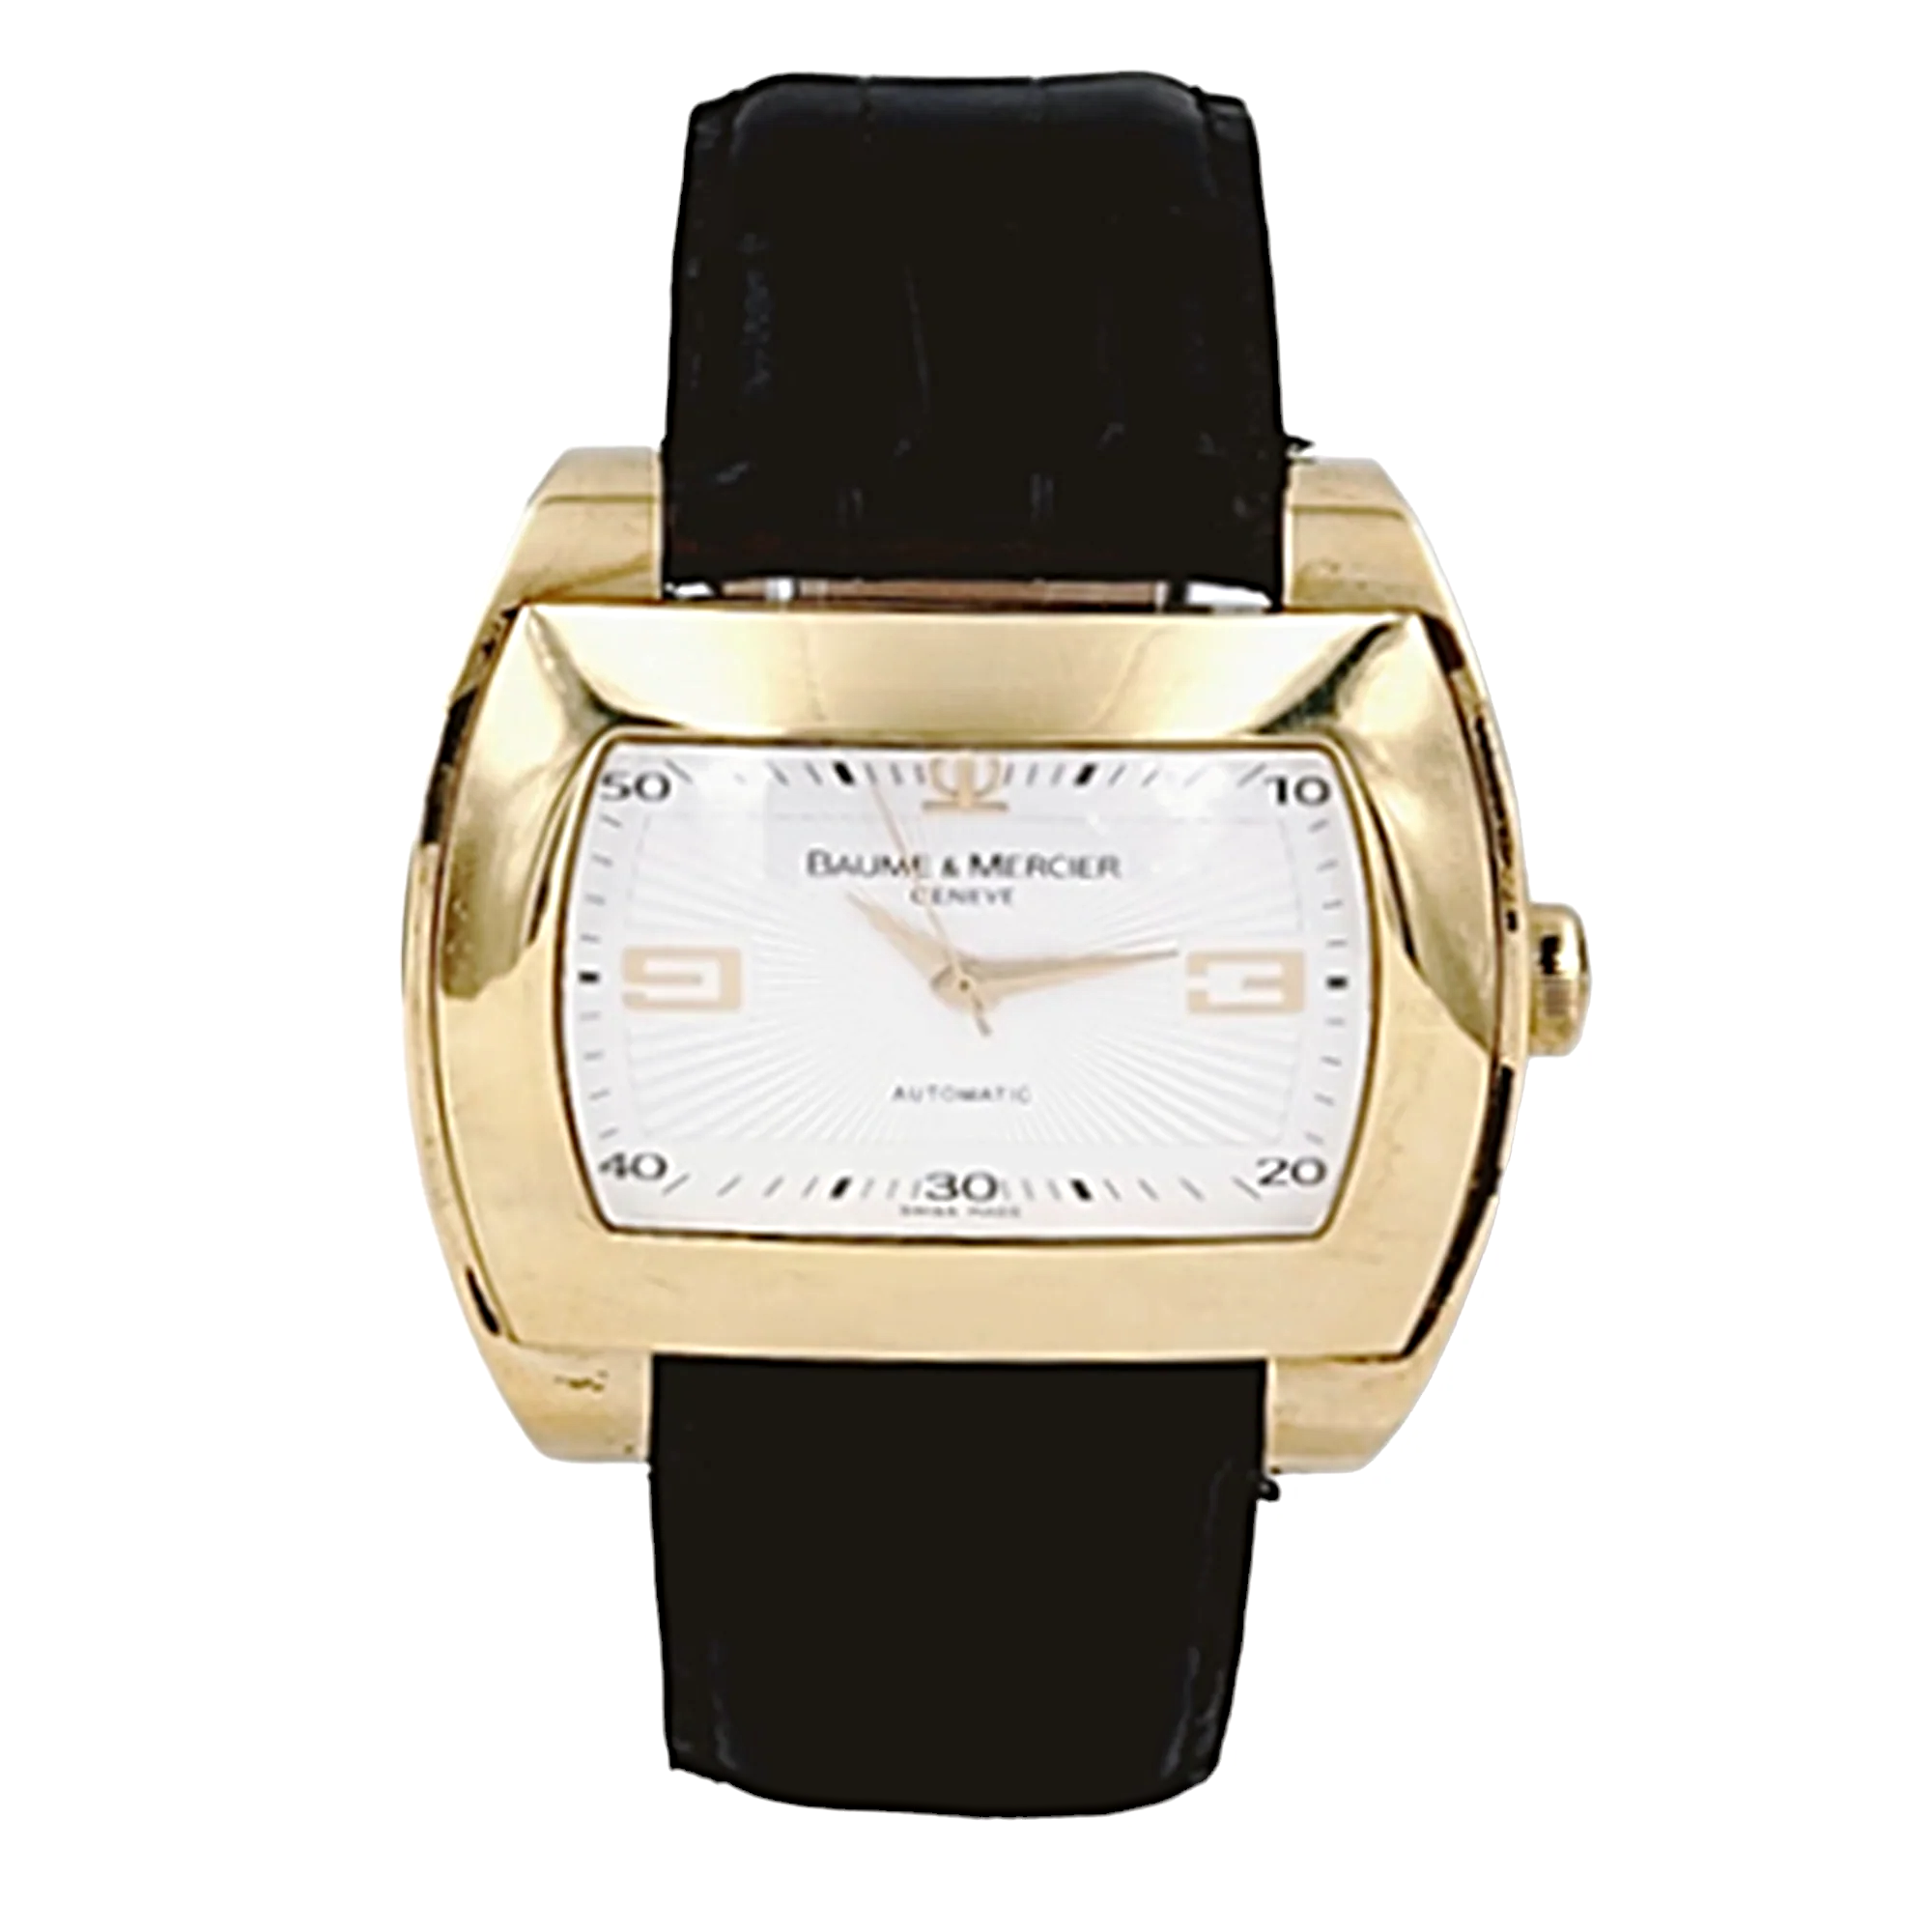 Men's Baume & Mercier 38mm x 42mm Hampton 18K Solid Yellow Gold Automatic Watch with Black Leather Band and Silver Dial. (Pre-Owned)